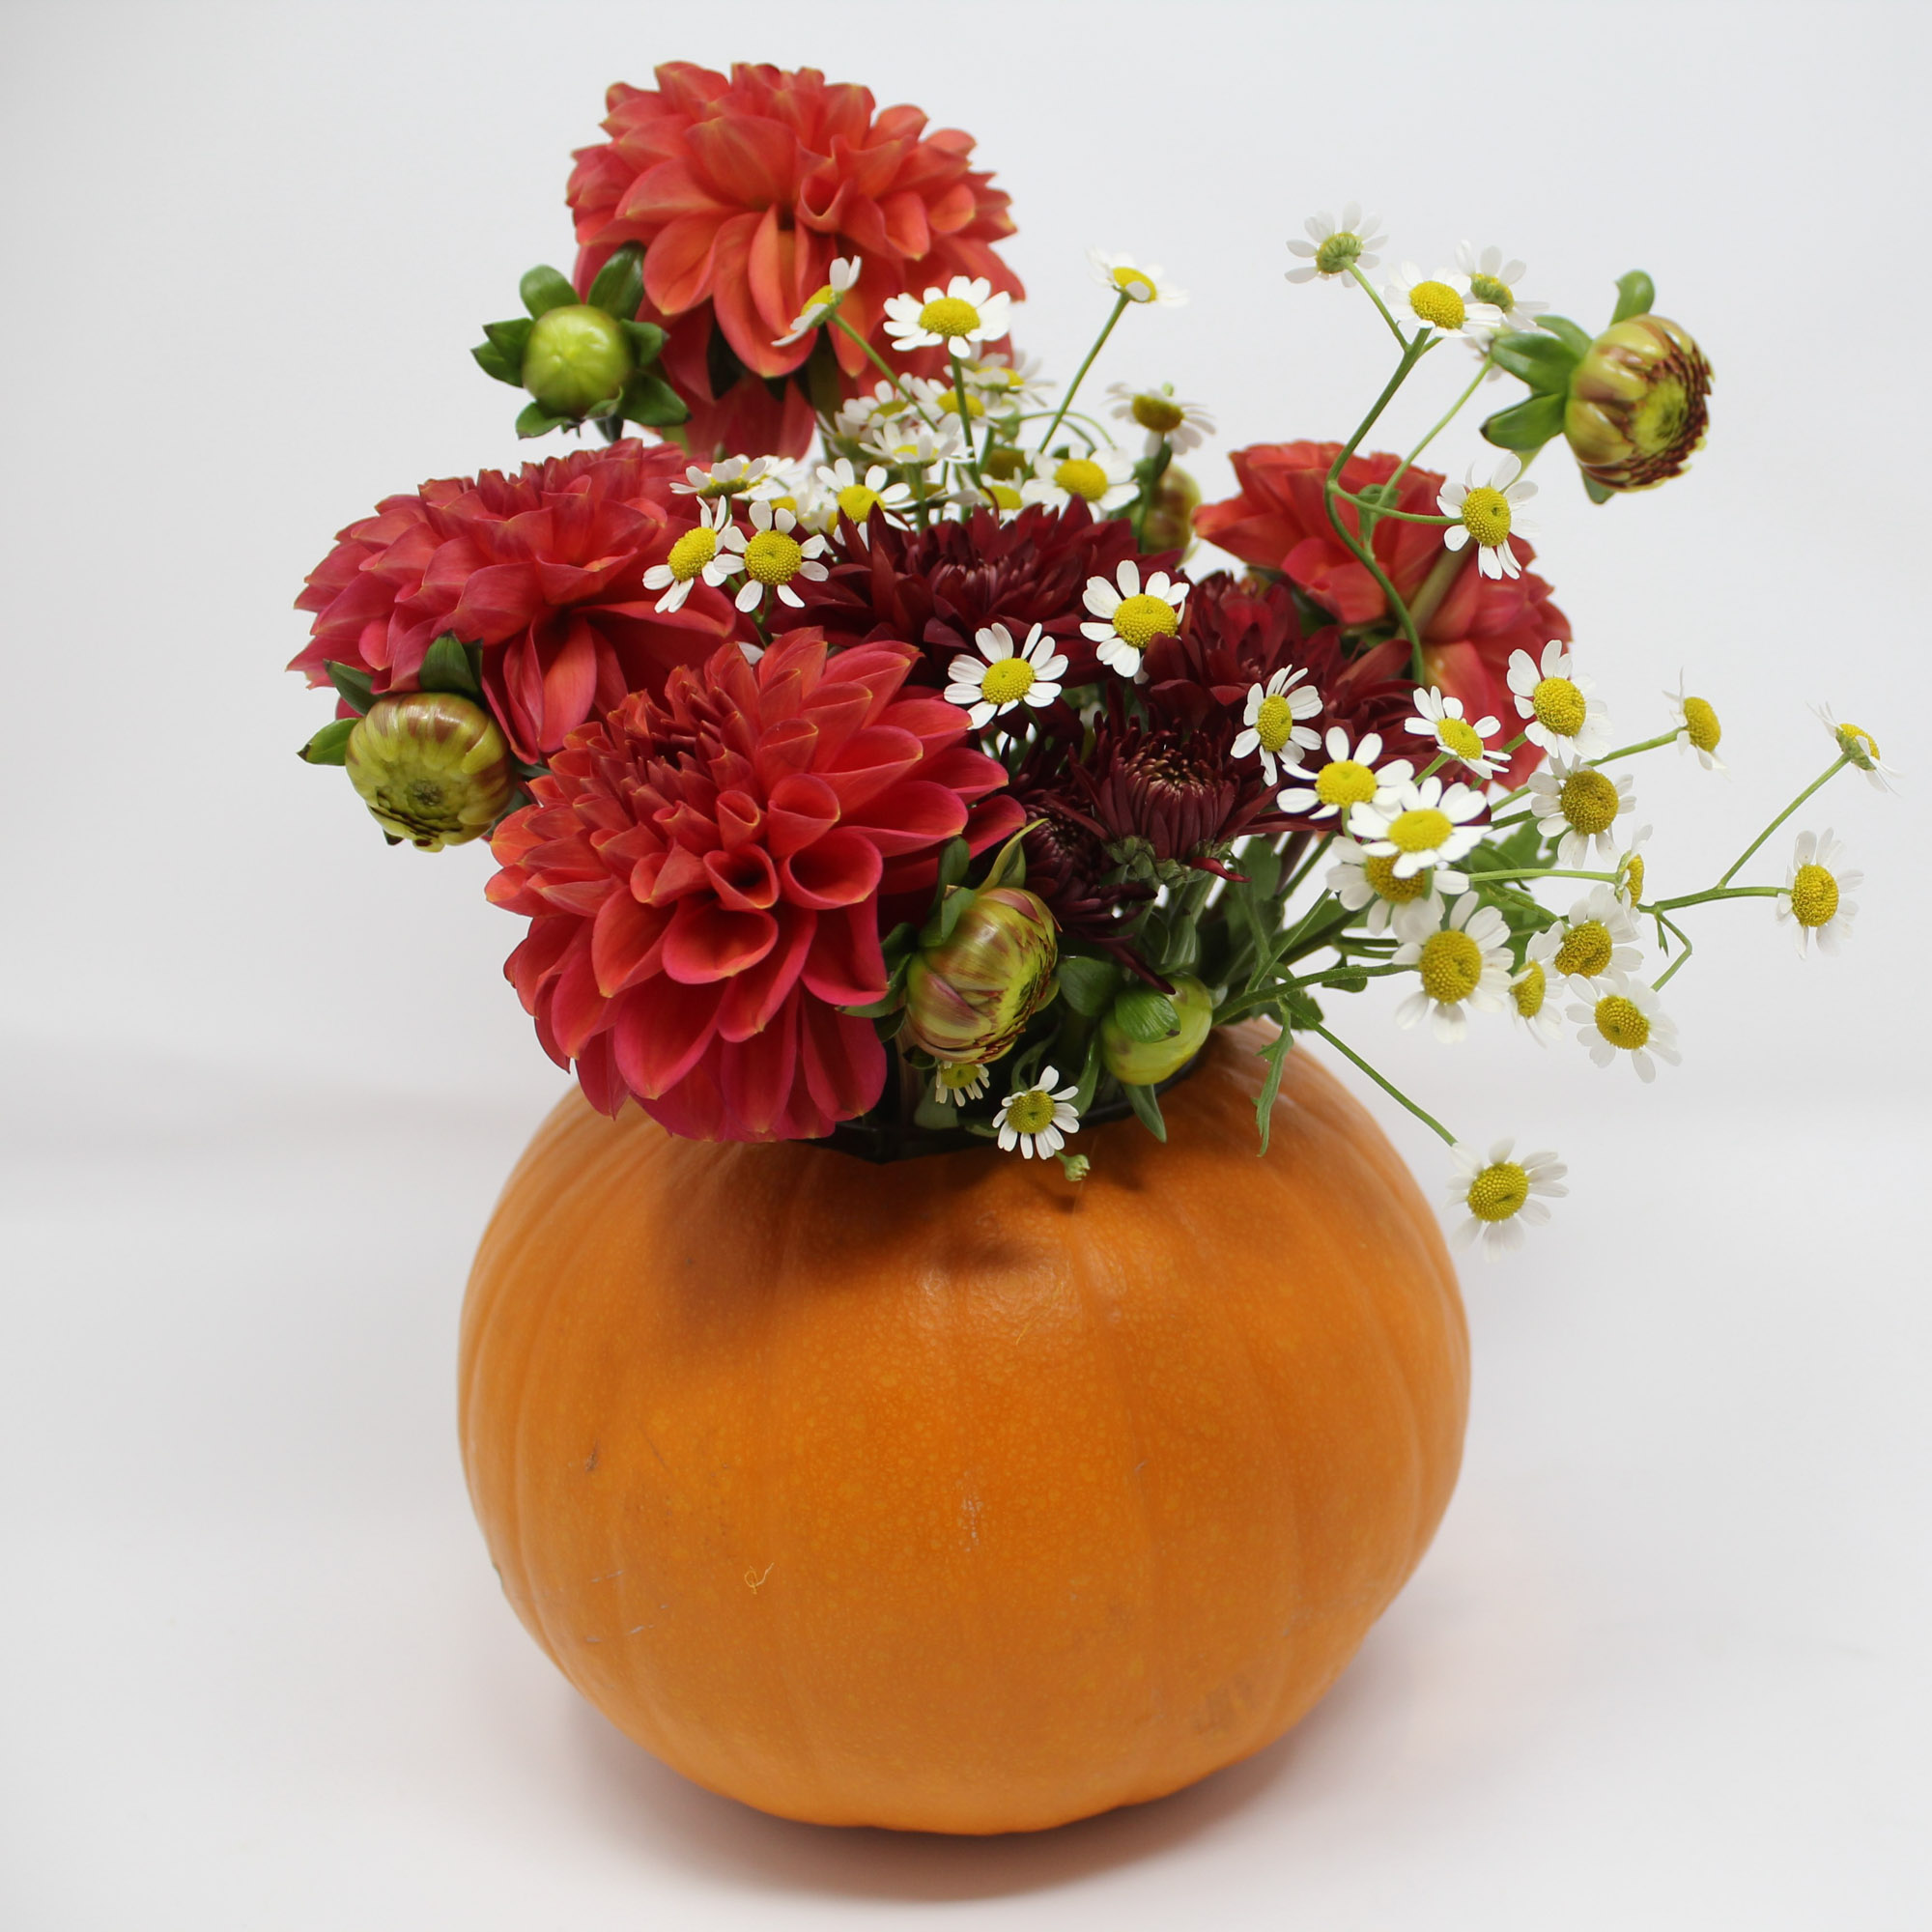 Photo of a floral arrangement with red, white, and yellow flowers in a small orange pumpkin.